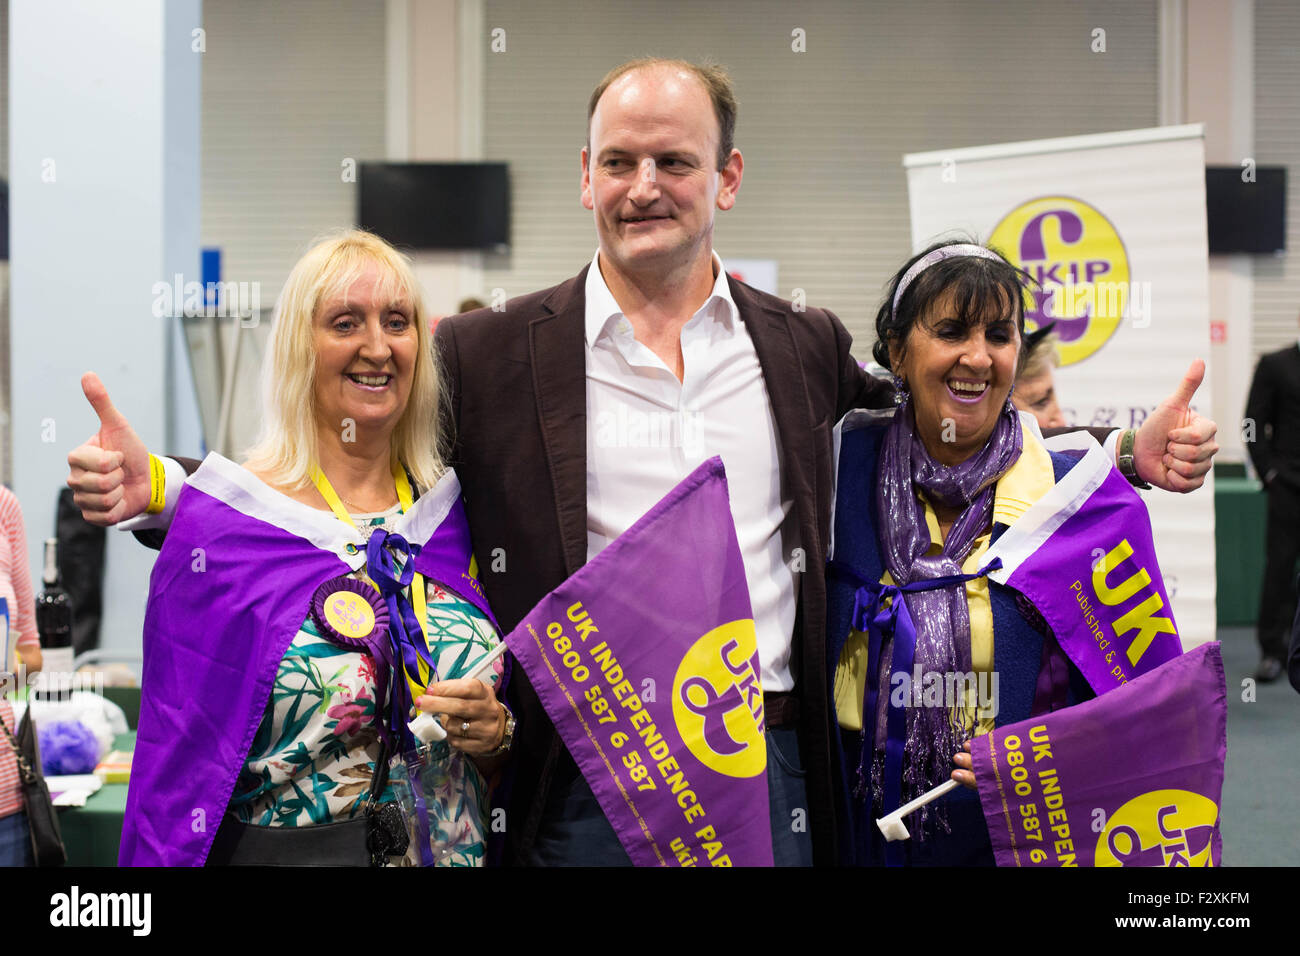 Doncaster, South Yorkshire, UK. 25th September, 2015. Douglas Carswell MP with two supporters at the UKIP National Conference in Doncaster South Yorkshire, UK. 25th September 2015. UKIP leader Farage today declared that he is to put the EU referendum battle before his party priorities. Credit:  Ian Hinchliffe/Alamy Live News Stock Photo